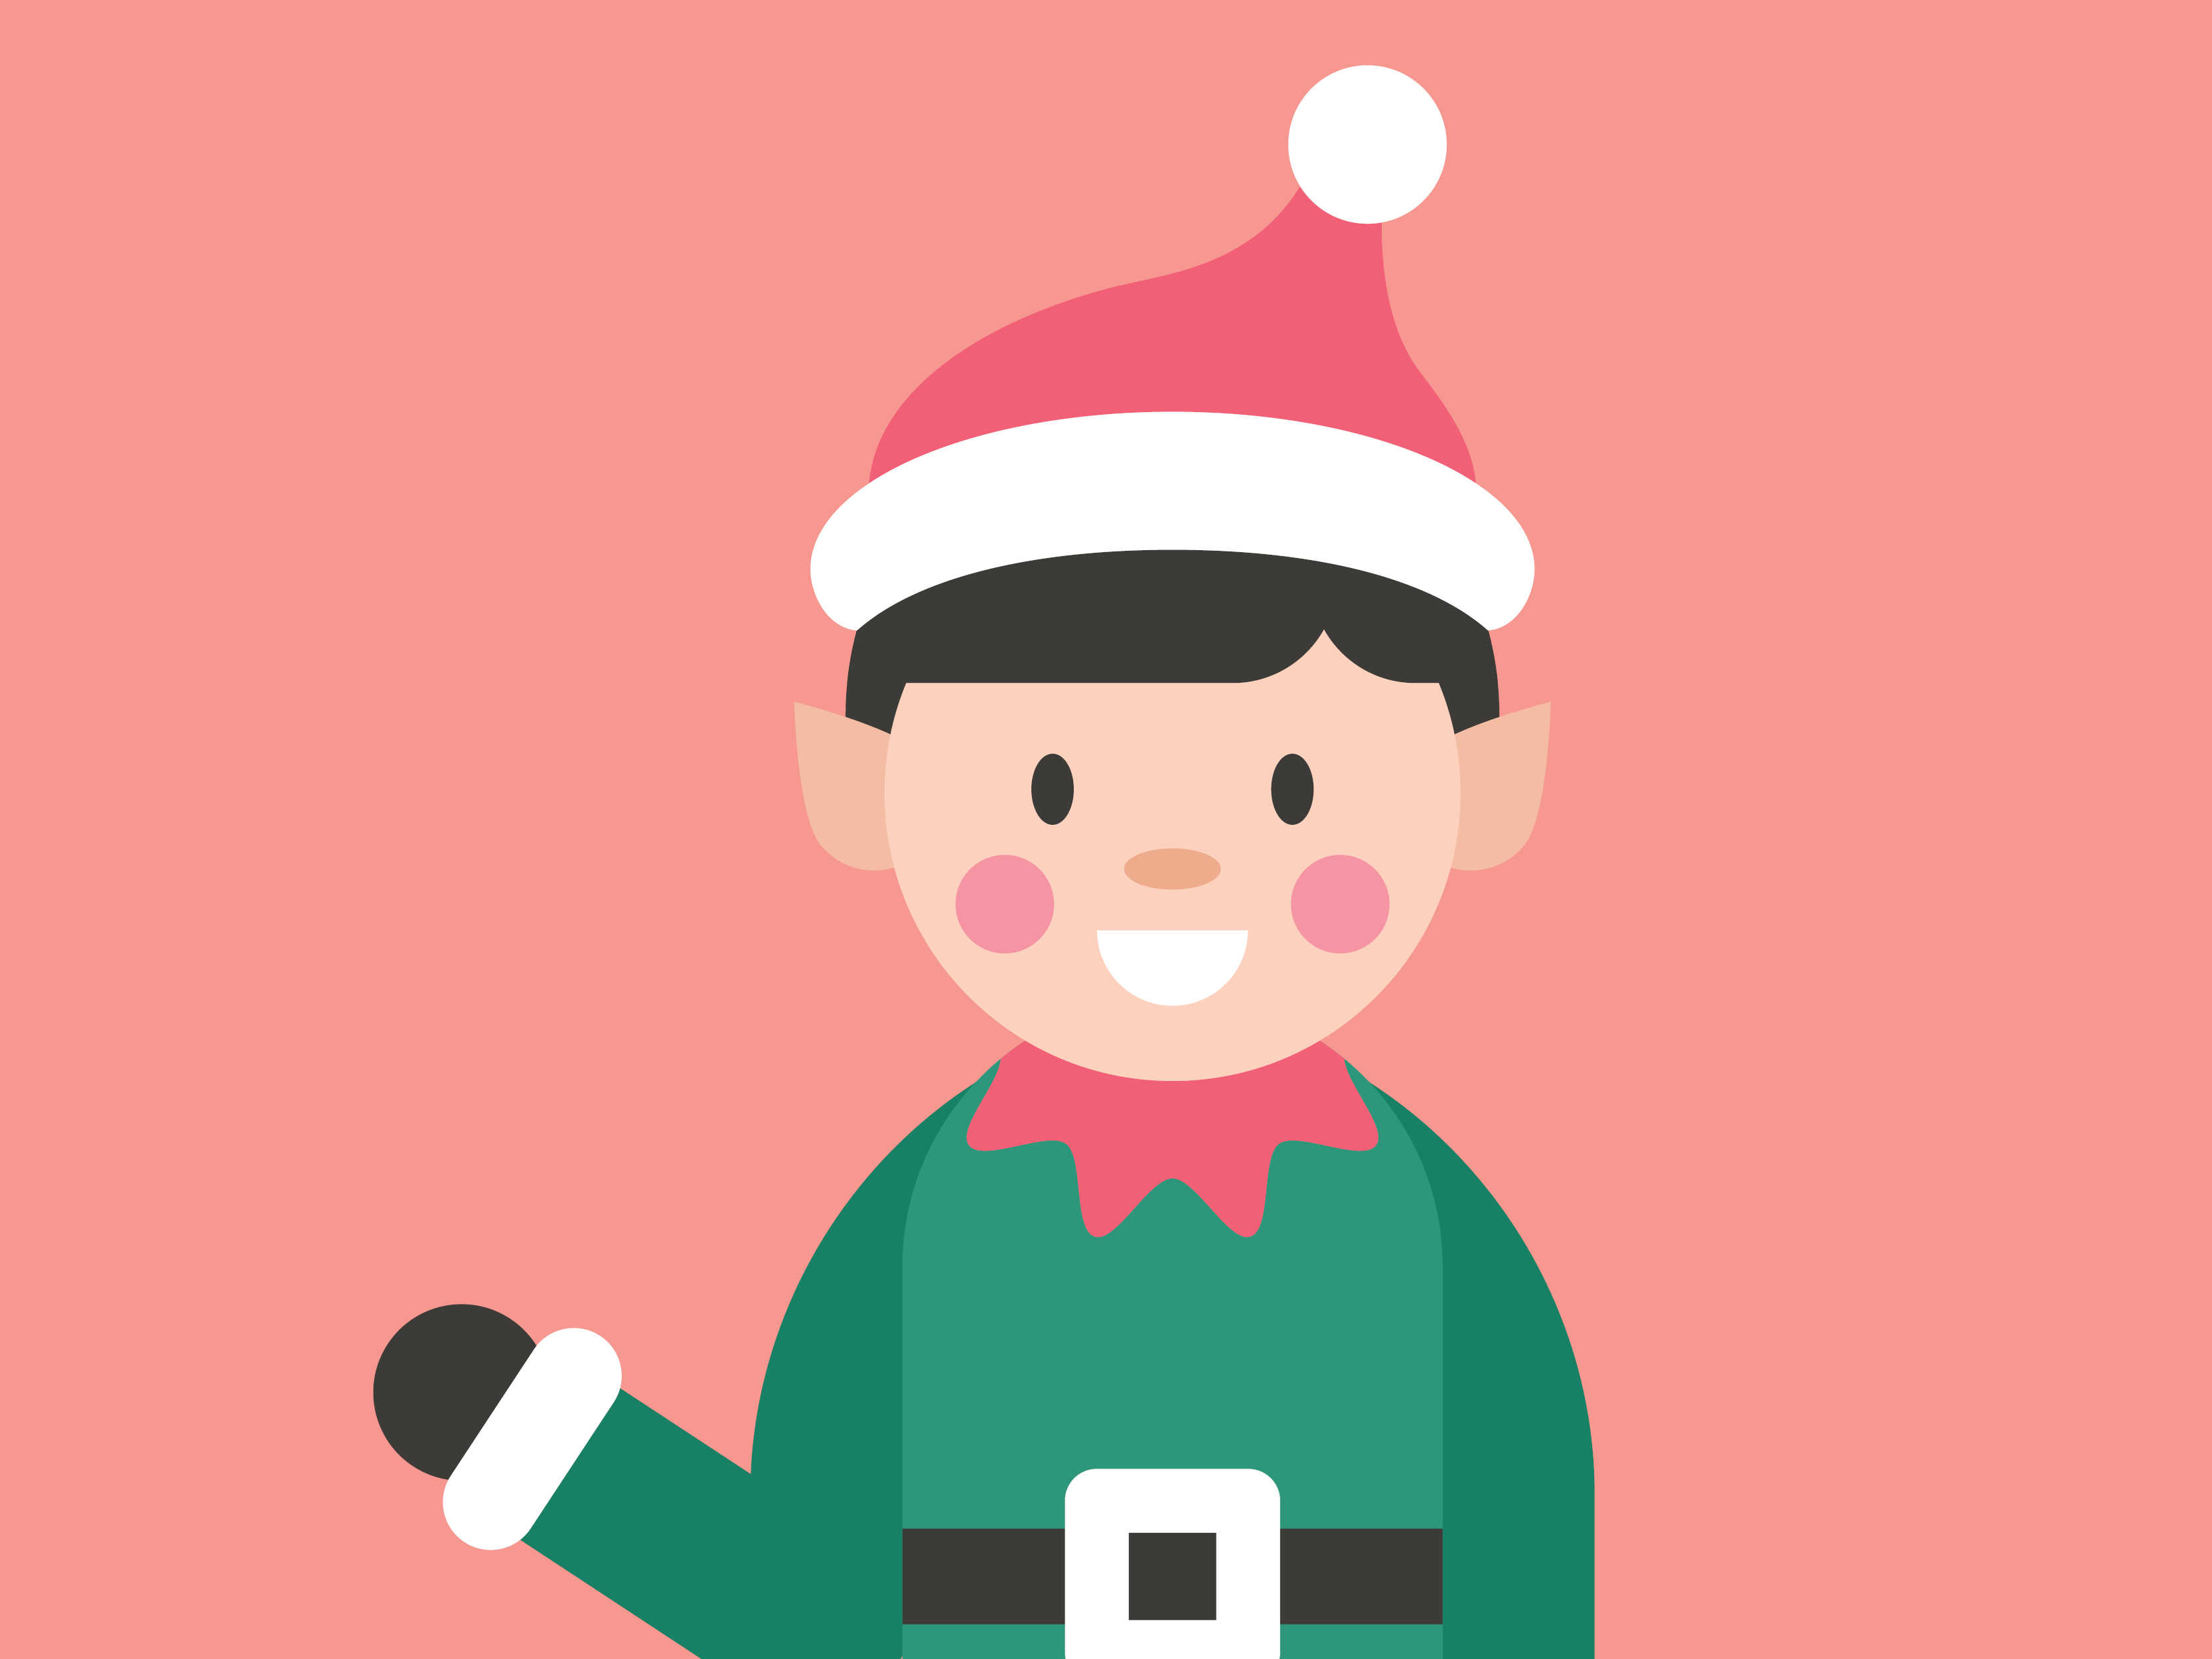 Illustration of a smiling elf waiving